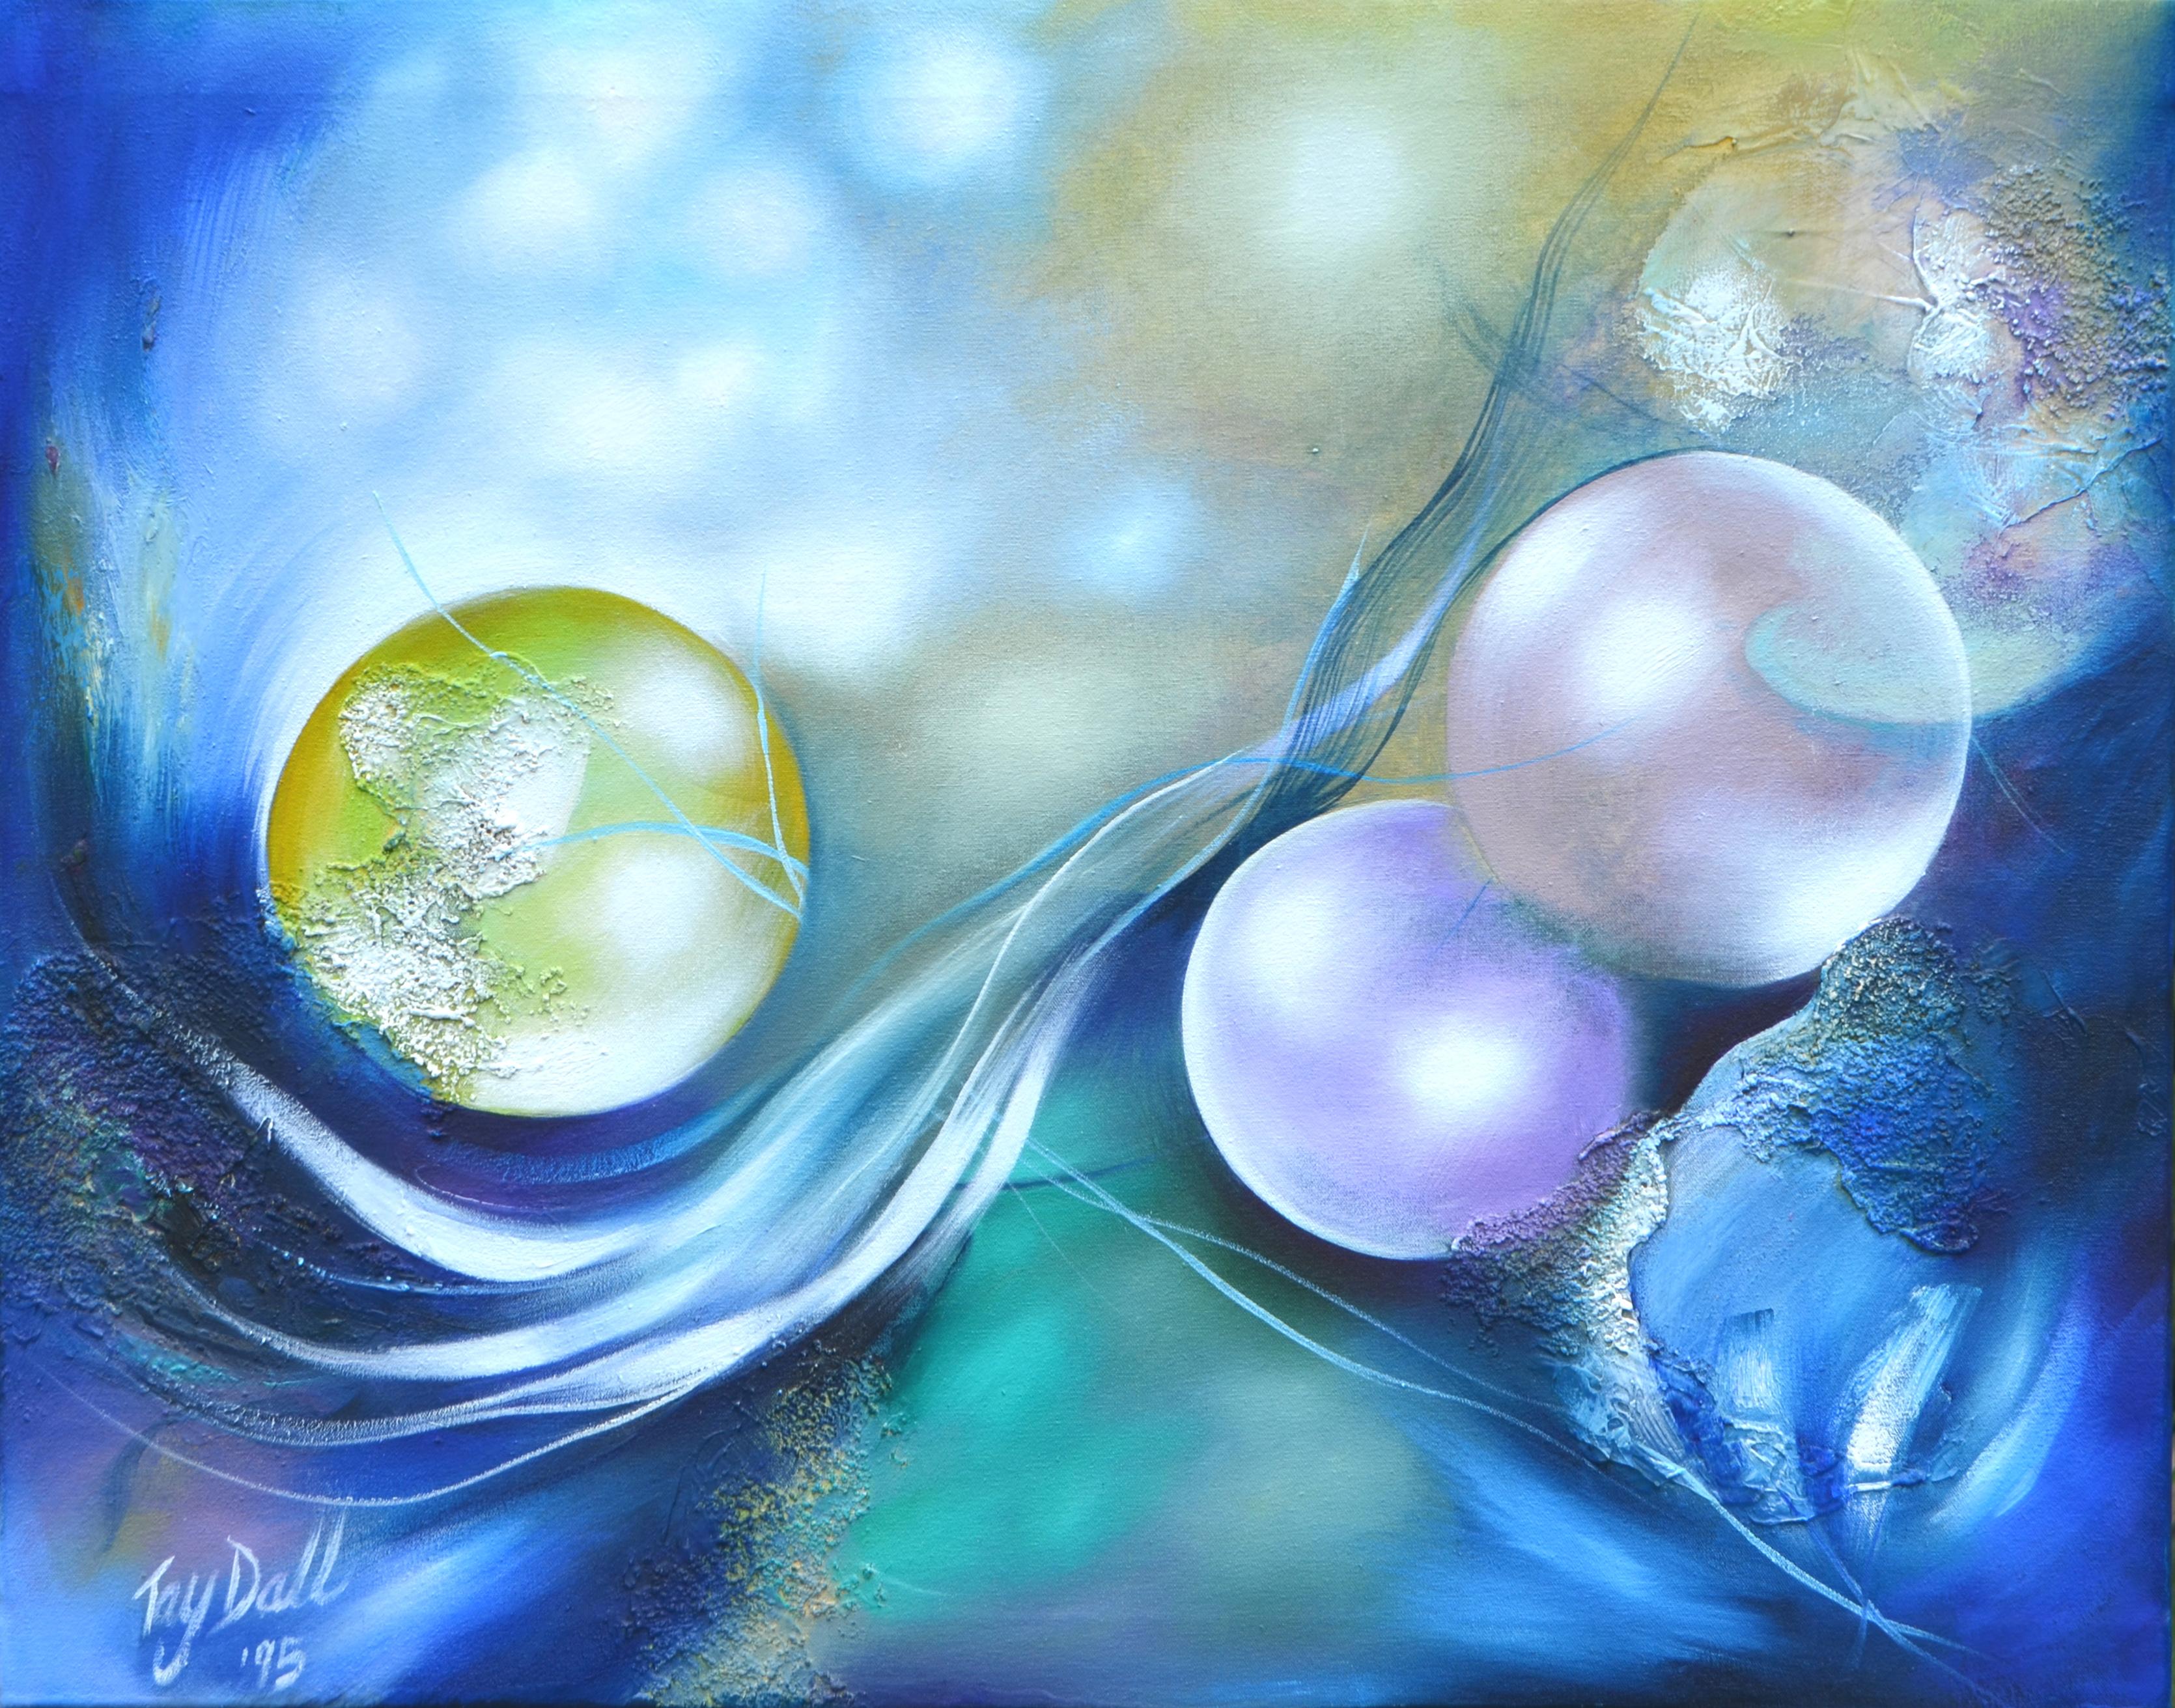 Tay Dall Abstract Painting - Vivid Pastel Surreal Painting "Whimsical Orbit"